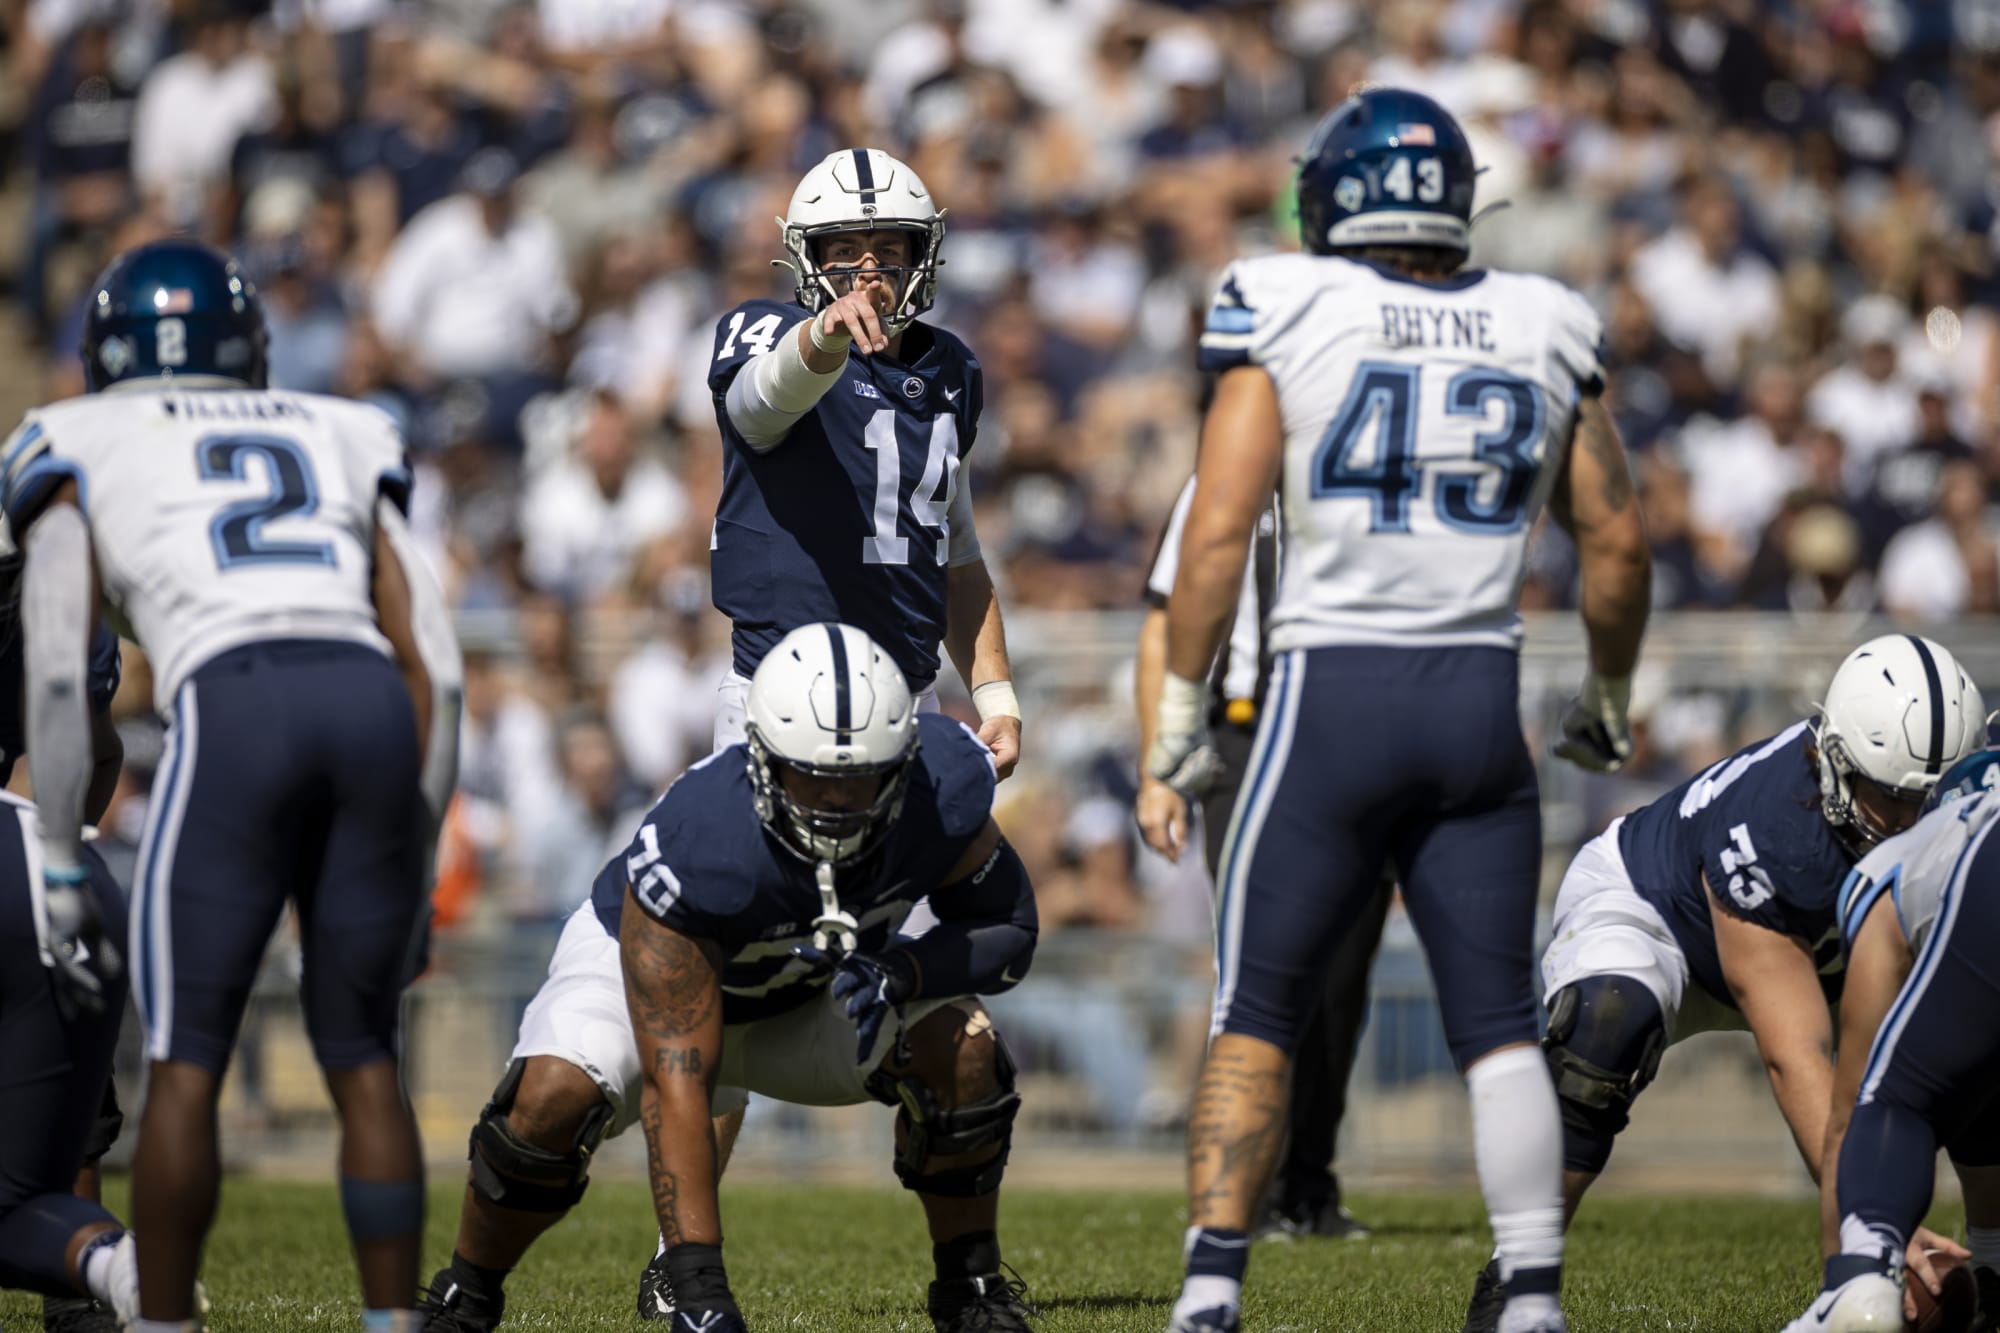 Penn State Game Today Penn State Vs Indiana Odds Injury Report Prediction Schedule Live